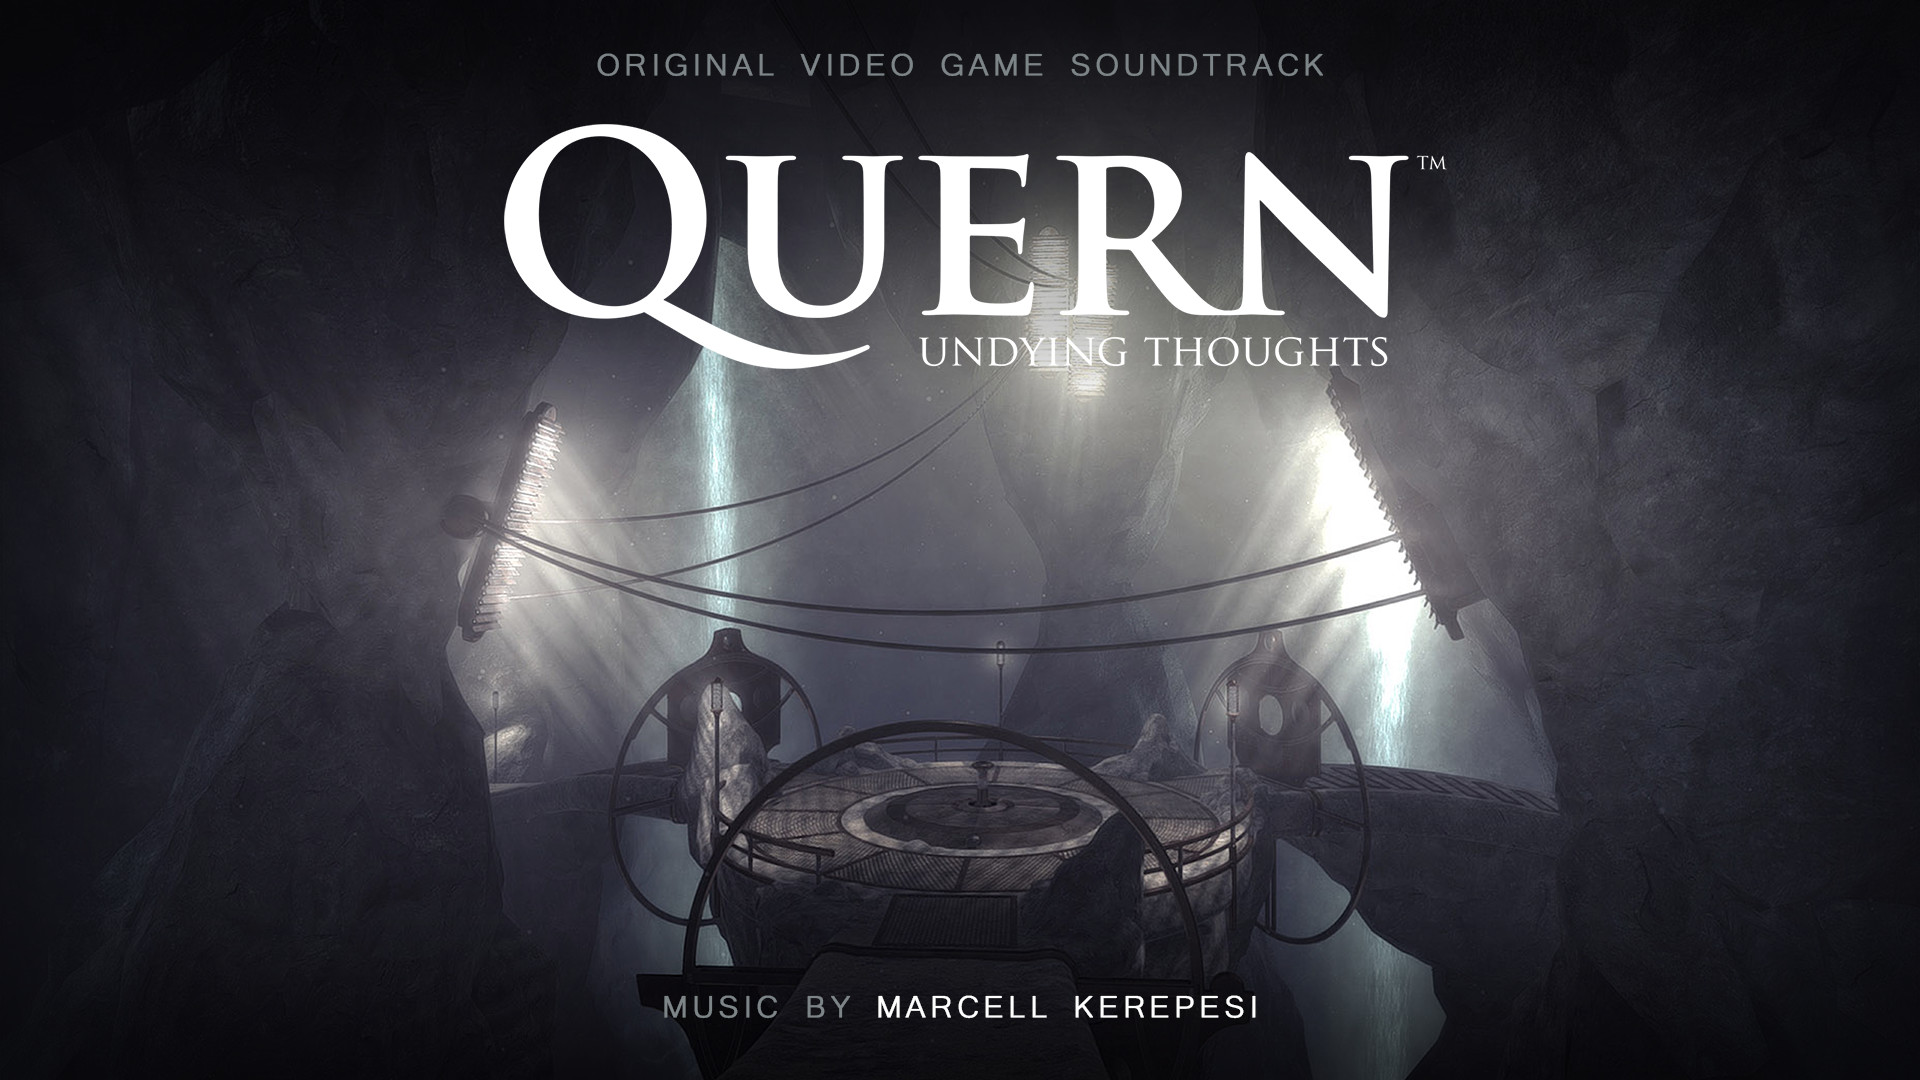 Quern - Undying Thoughts (Original Soundtrack) Featured Screenshot #1